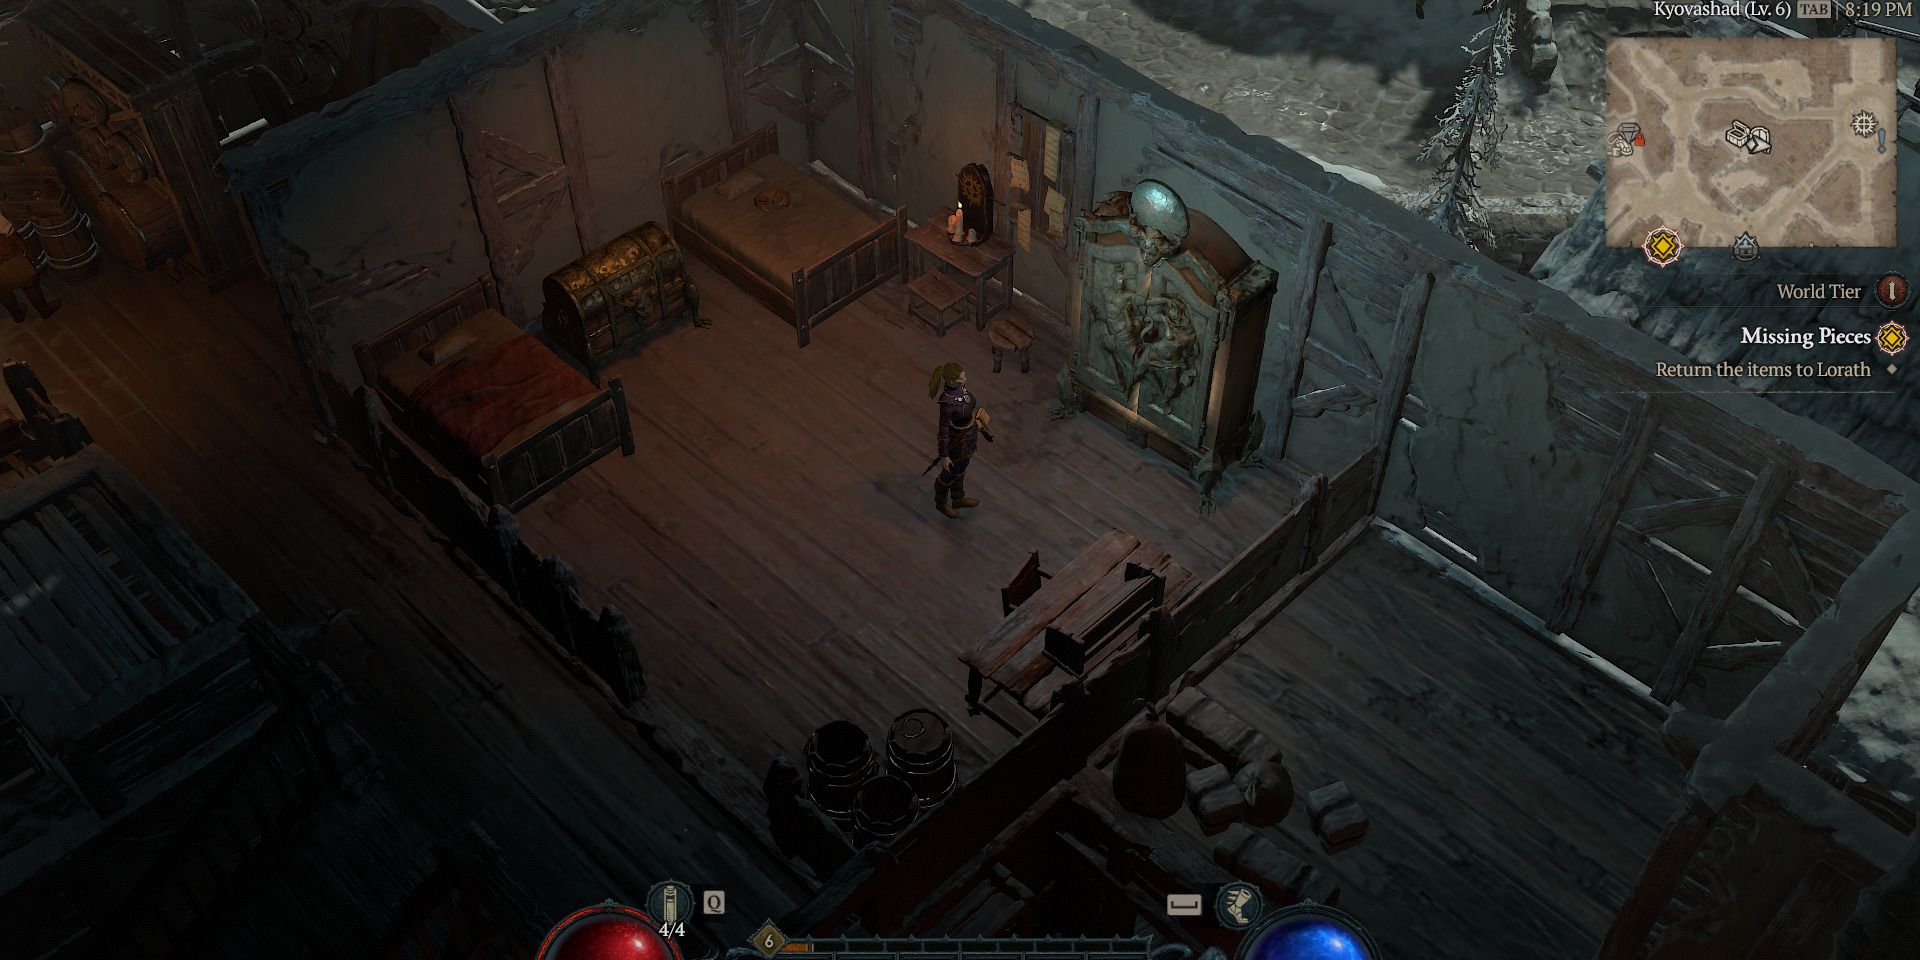 Image of a character standing in front of a wardrobe in Diablo 4.